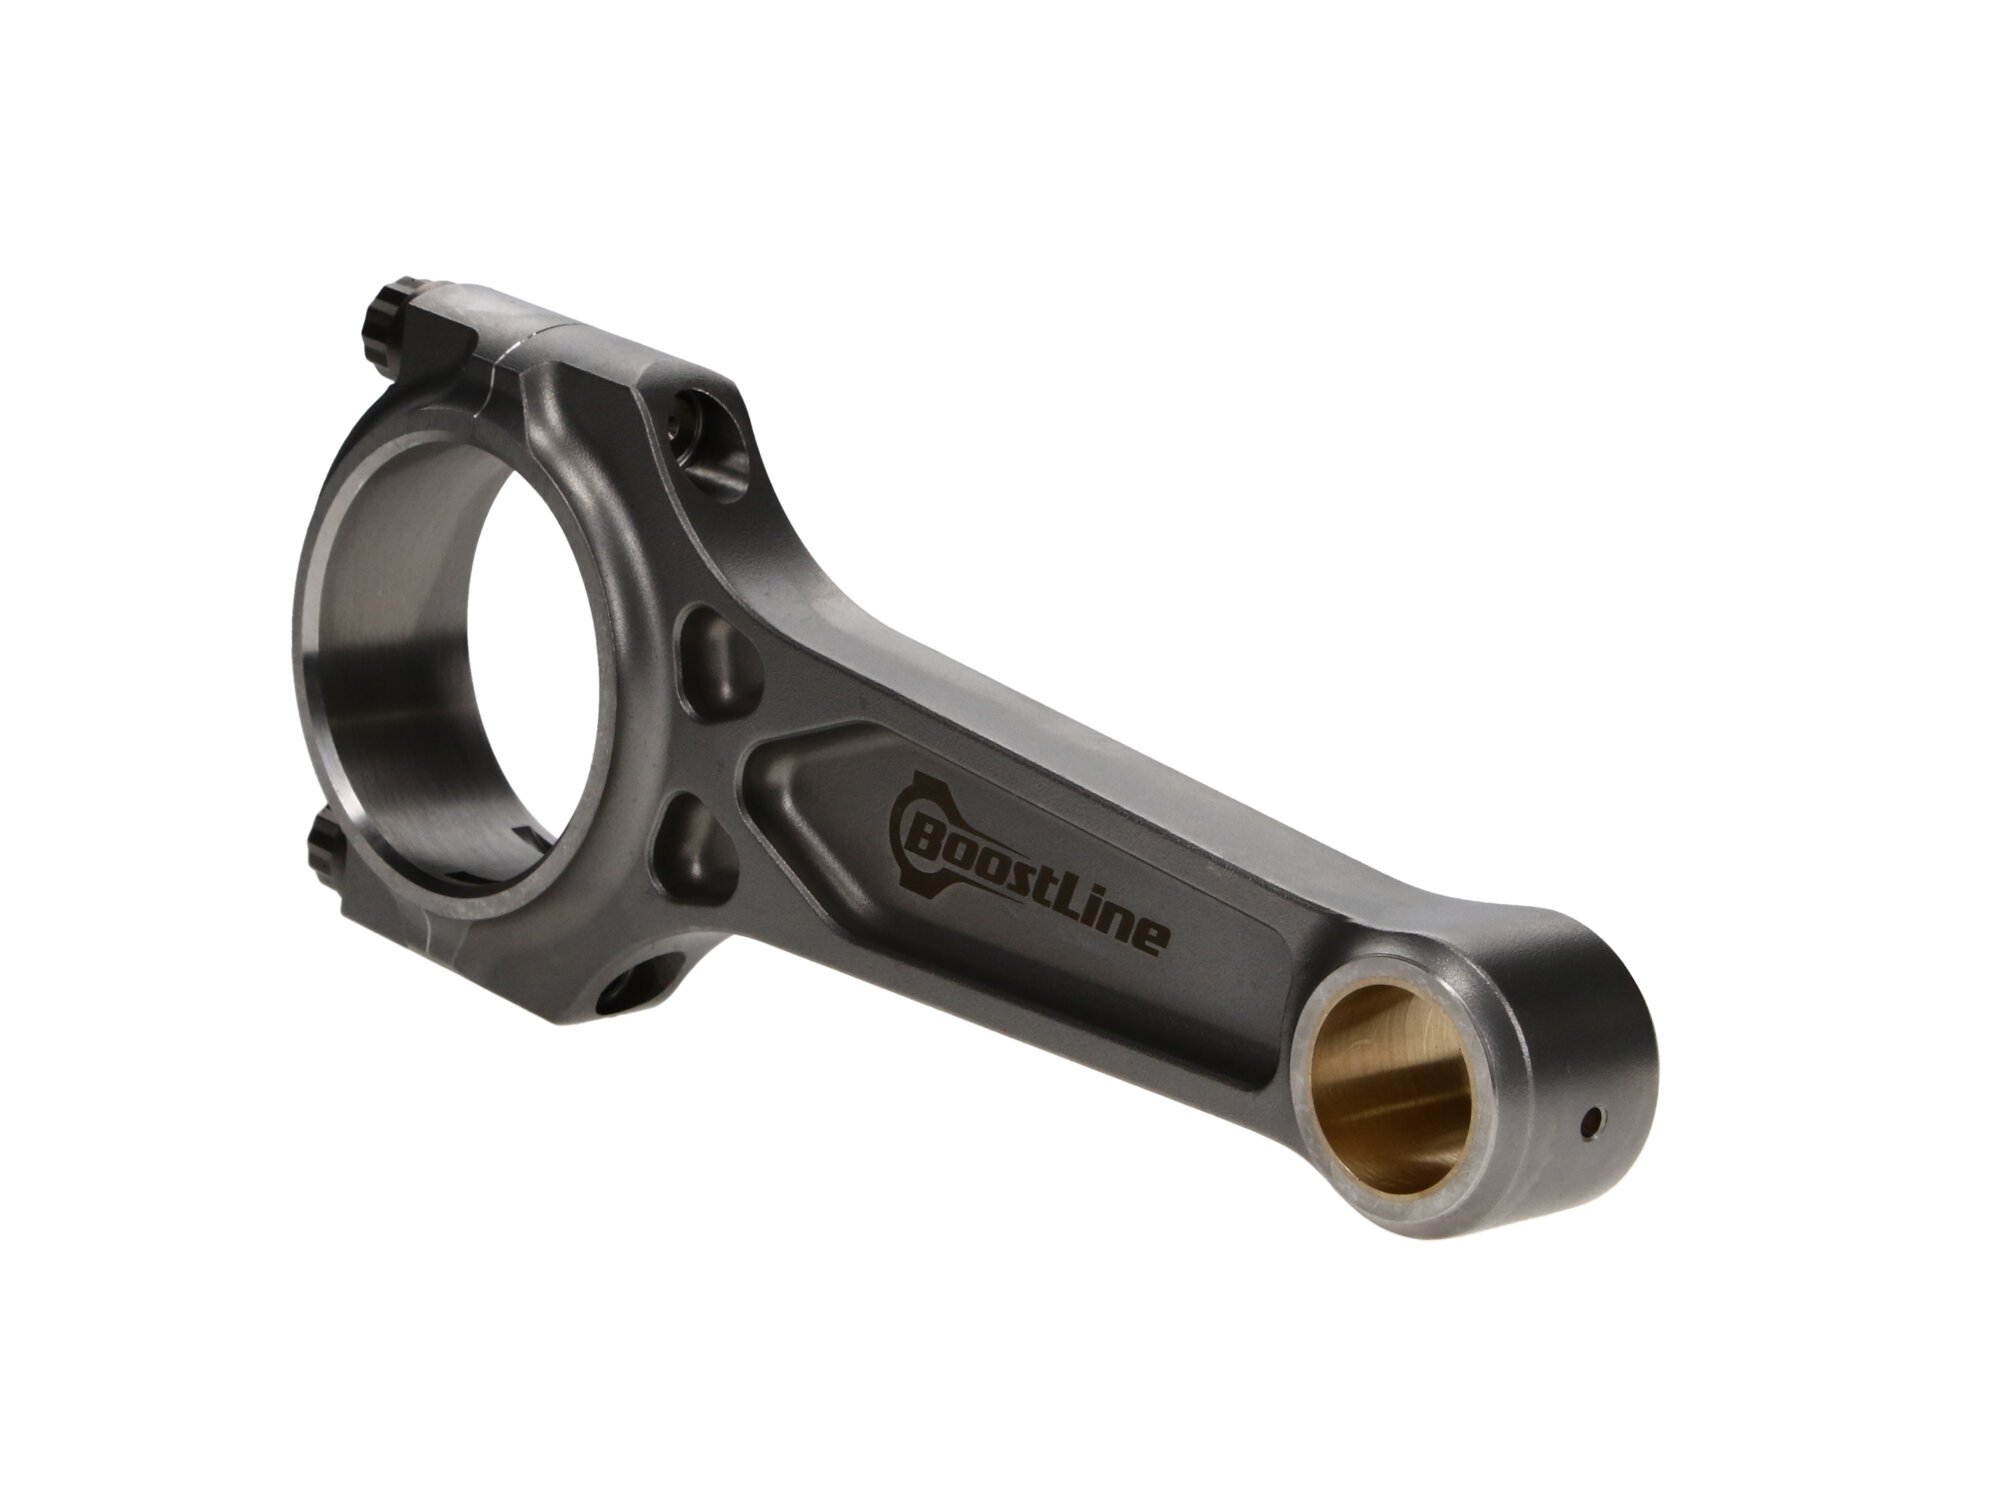 Chevrolet, 2.0T LTG, 6.004 in. Length, Connecting Rod